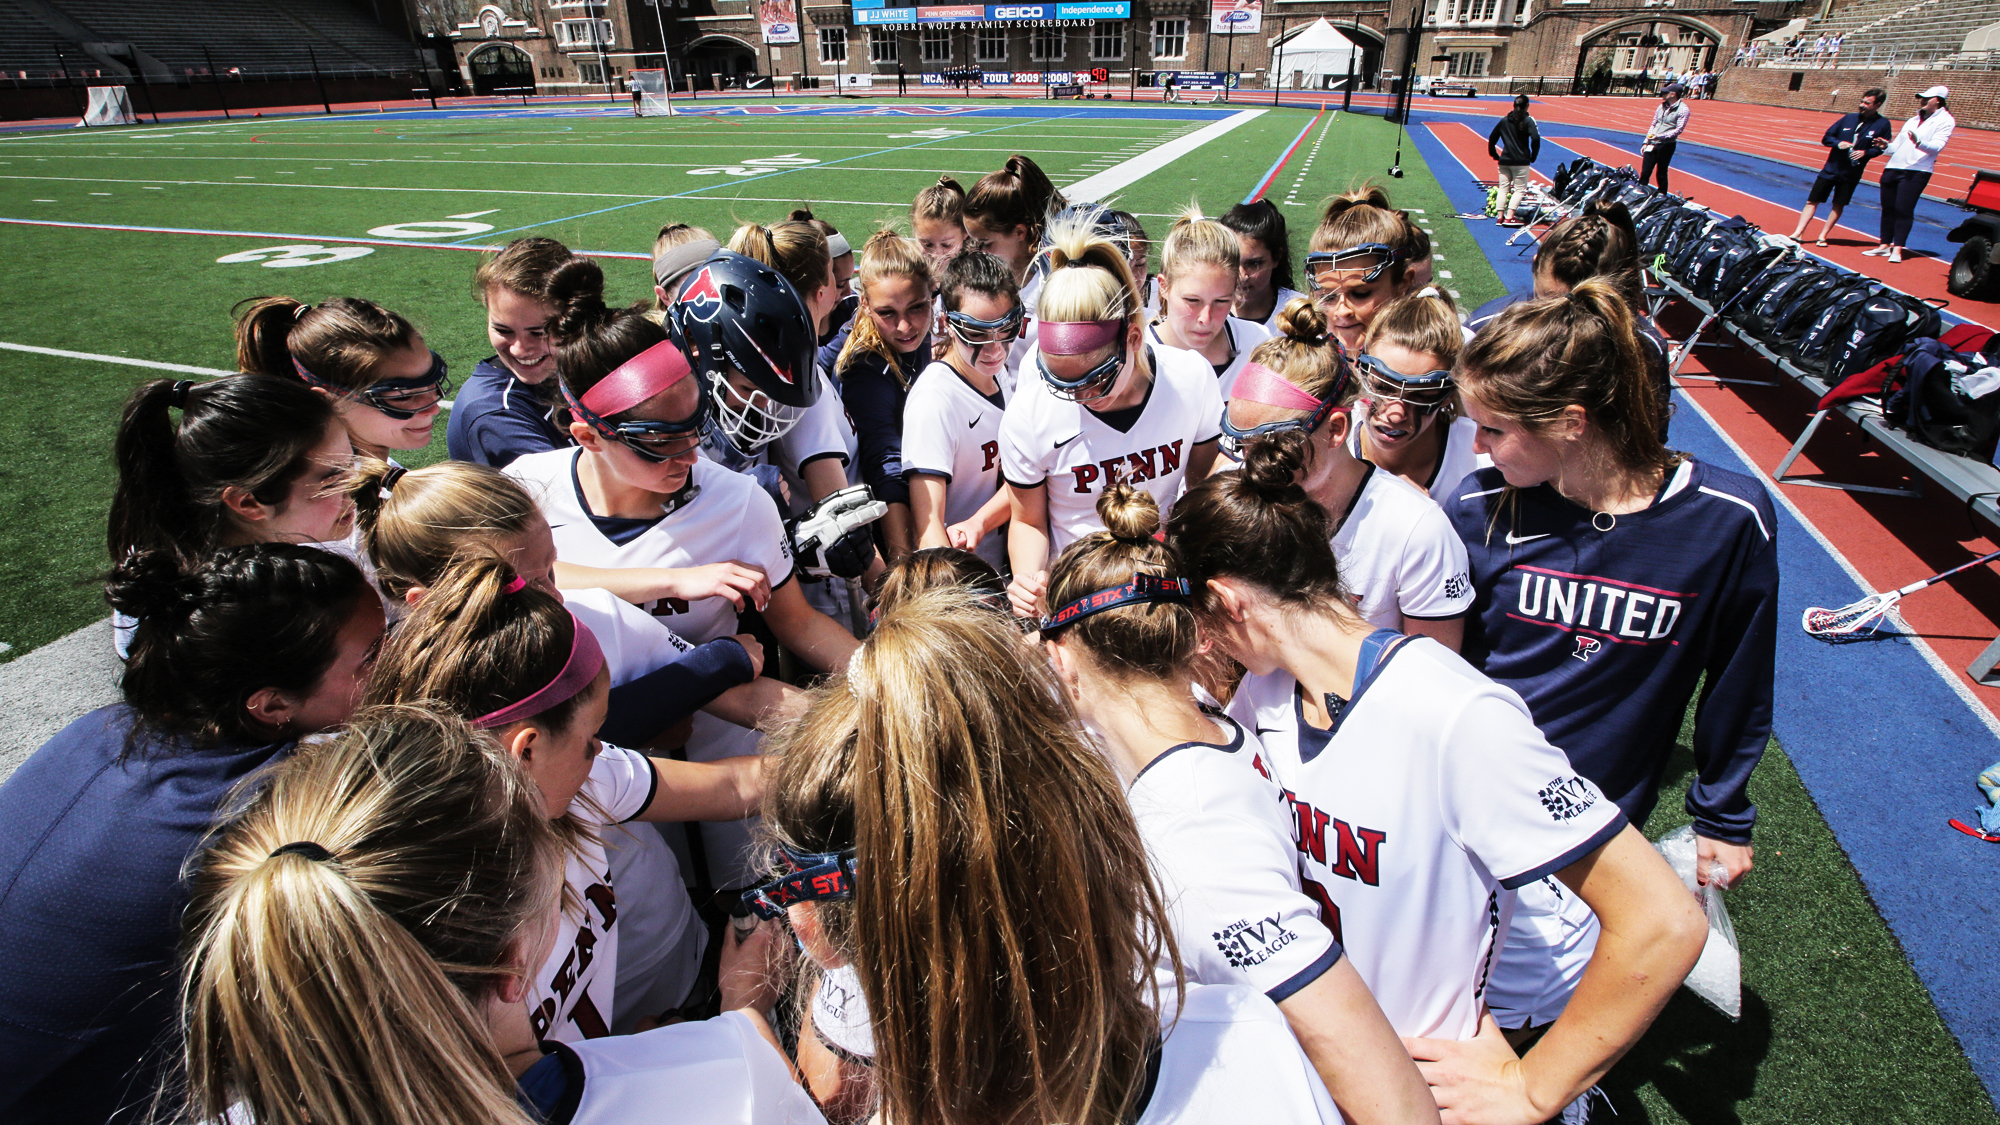 Women's lacrosse players put their hands in a circle on the sideline.